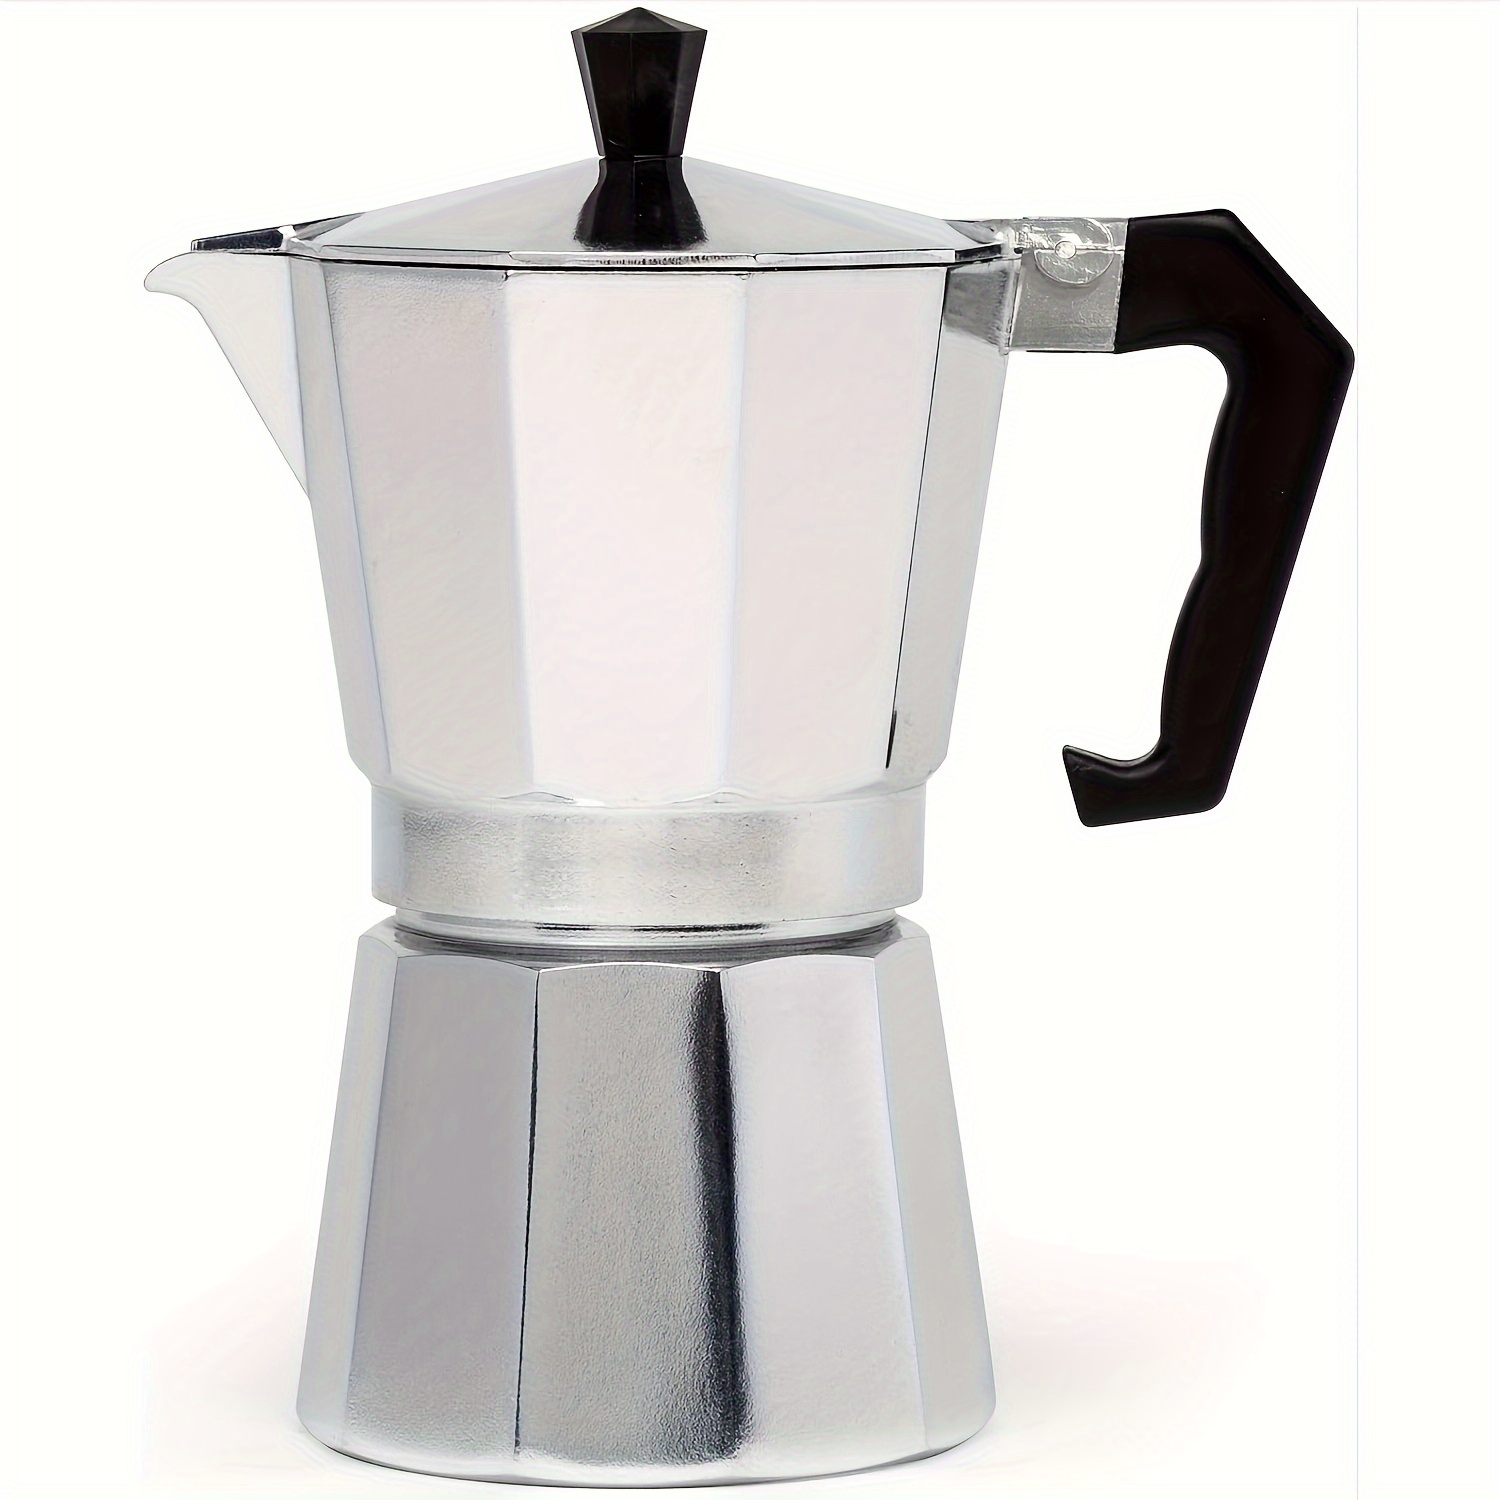 Cuban coffee maker, Aluminum construction . 9 cup GET ONE FREE Replacement